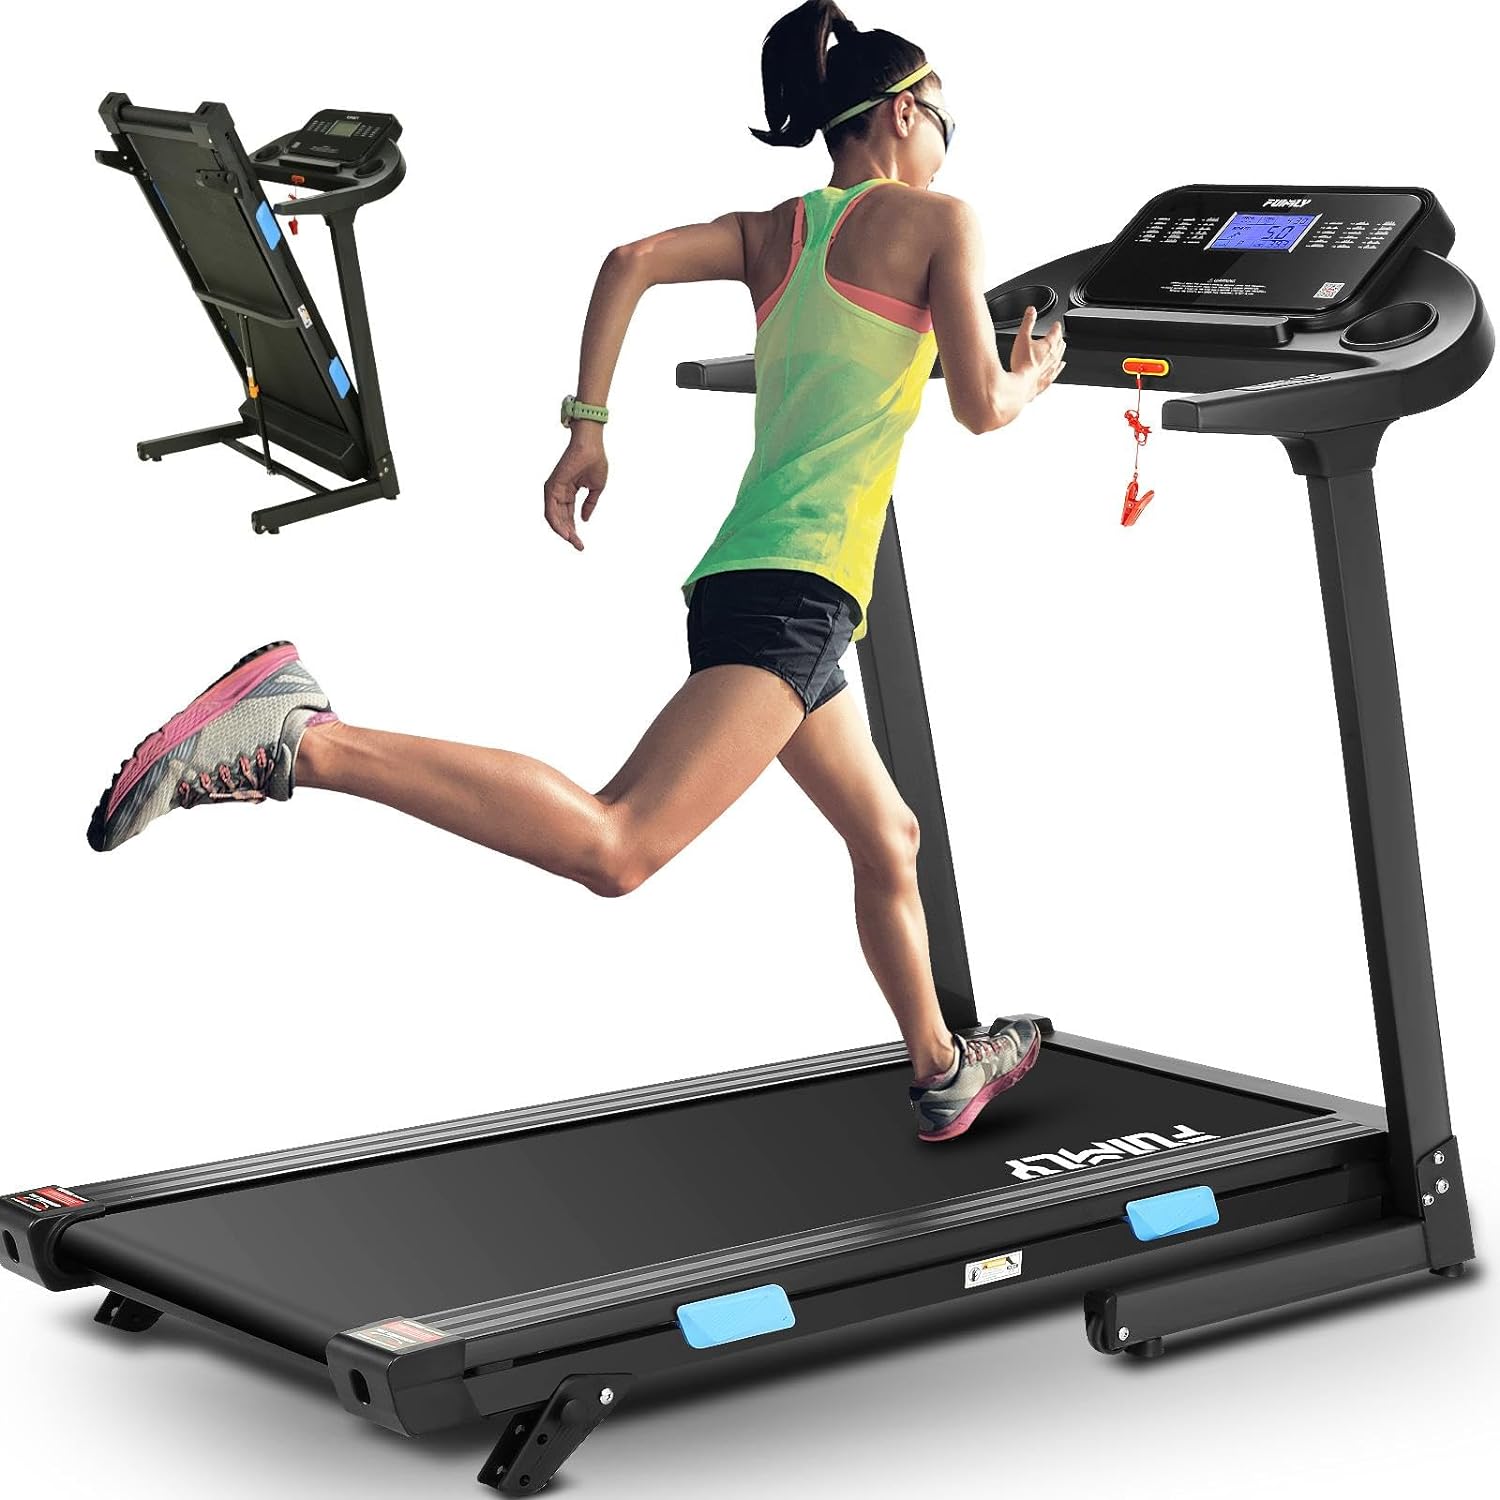 Ancheer 3.25HP Electric Treadmill 300LB Capacity,18" Wide Foldable Treadmill w/3-Level Incline,36 Pre-Programs, LCD Display, App Control